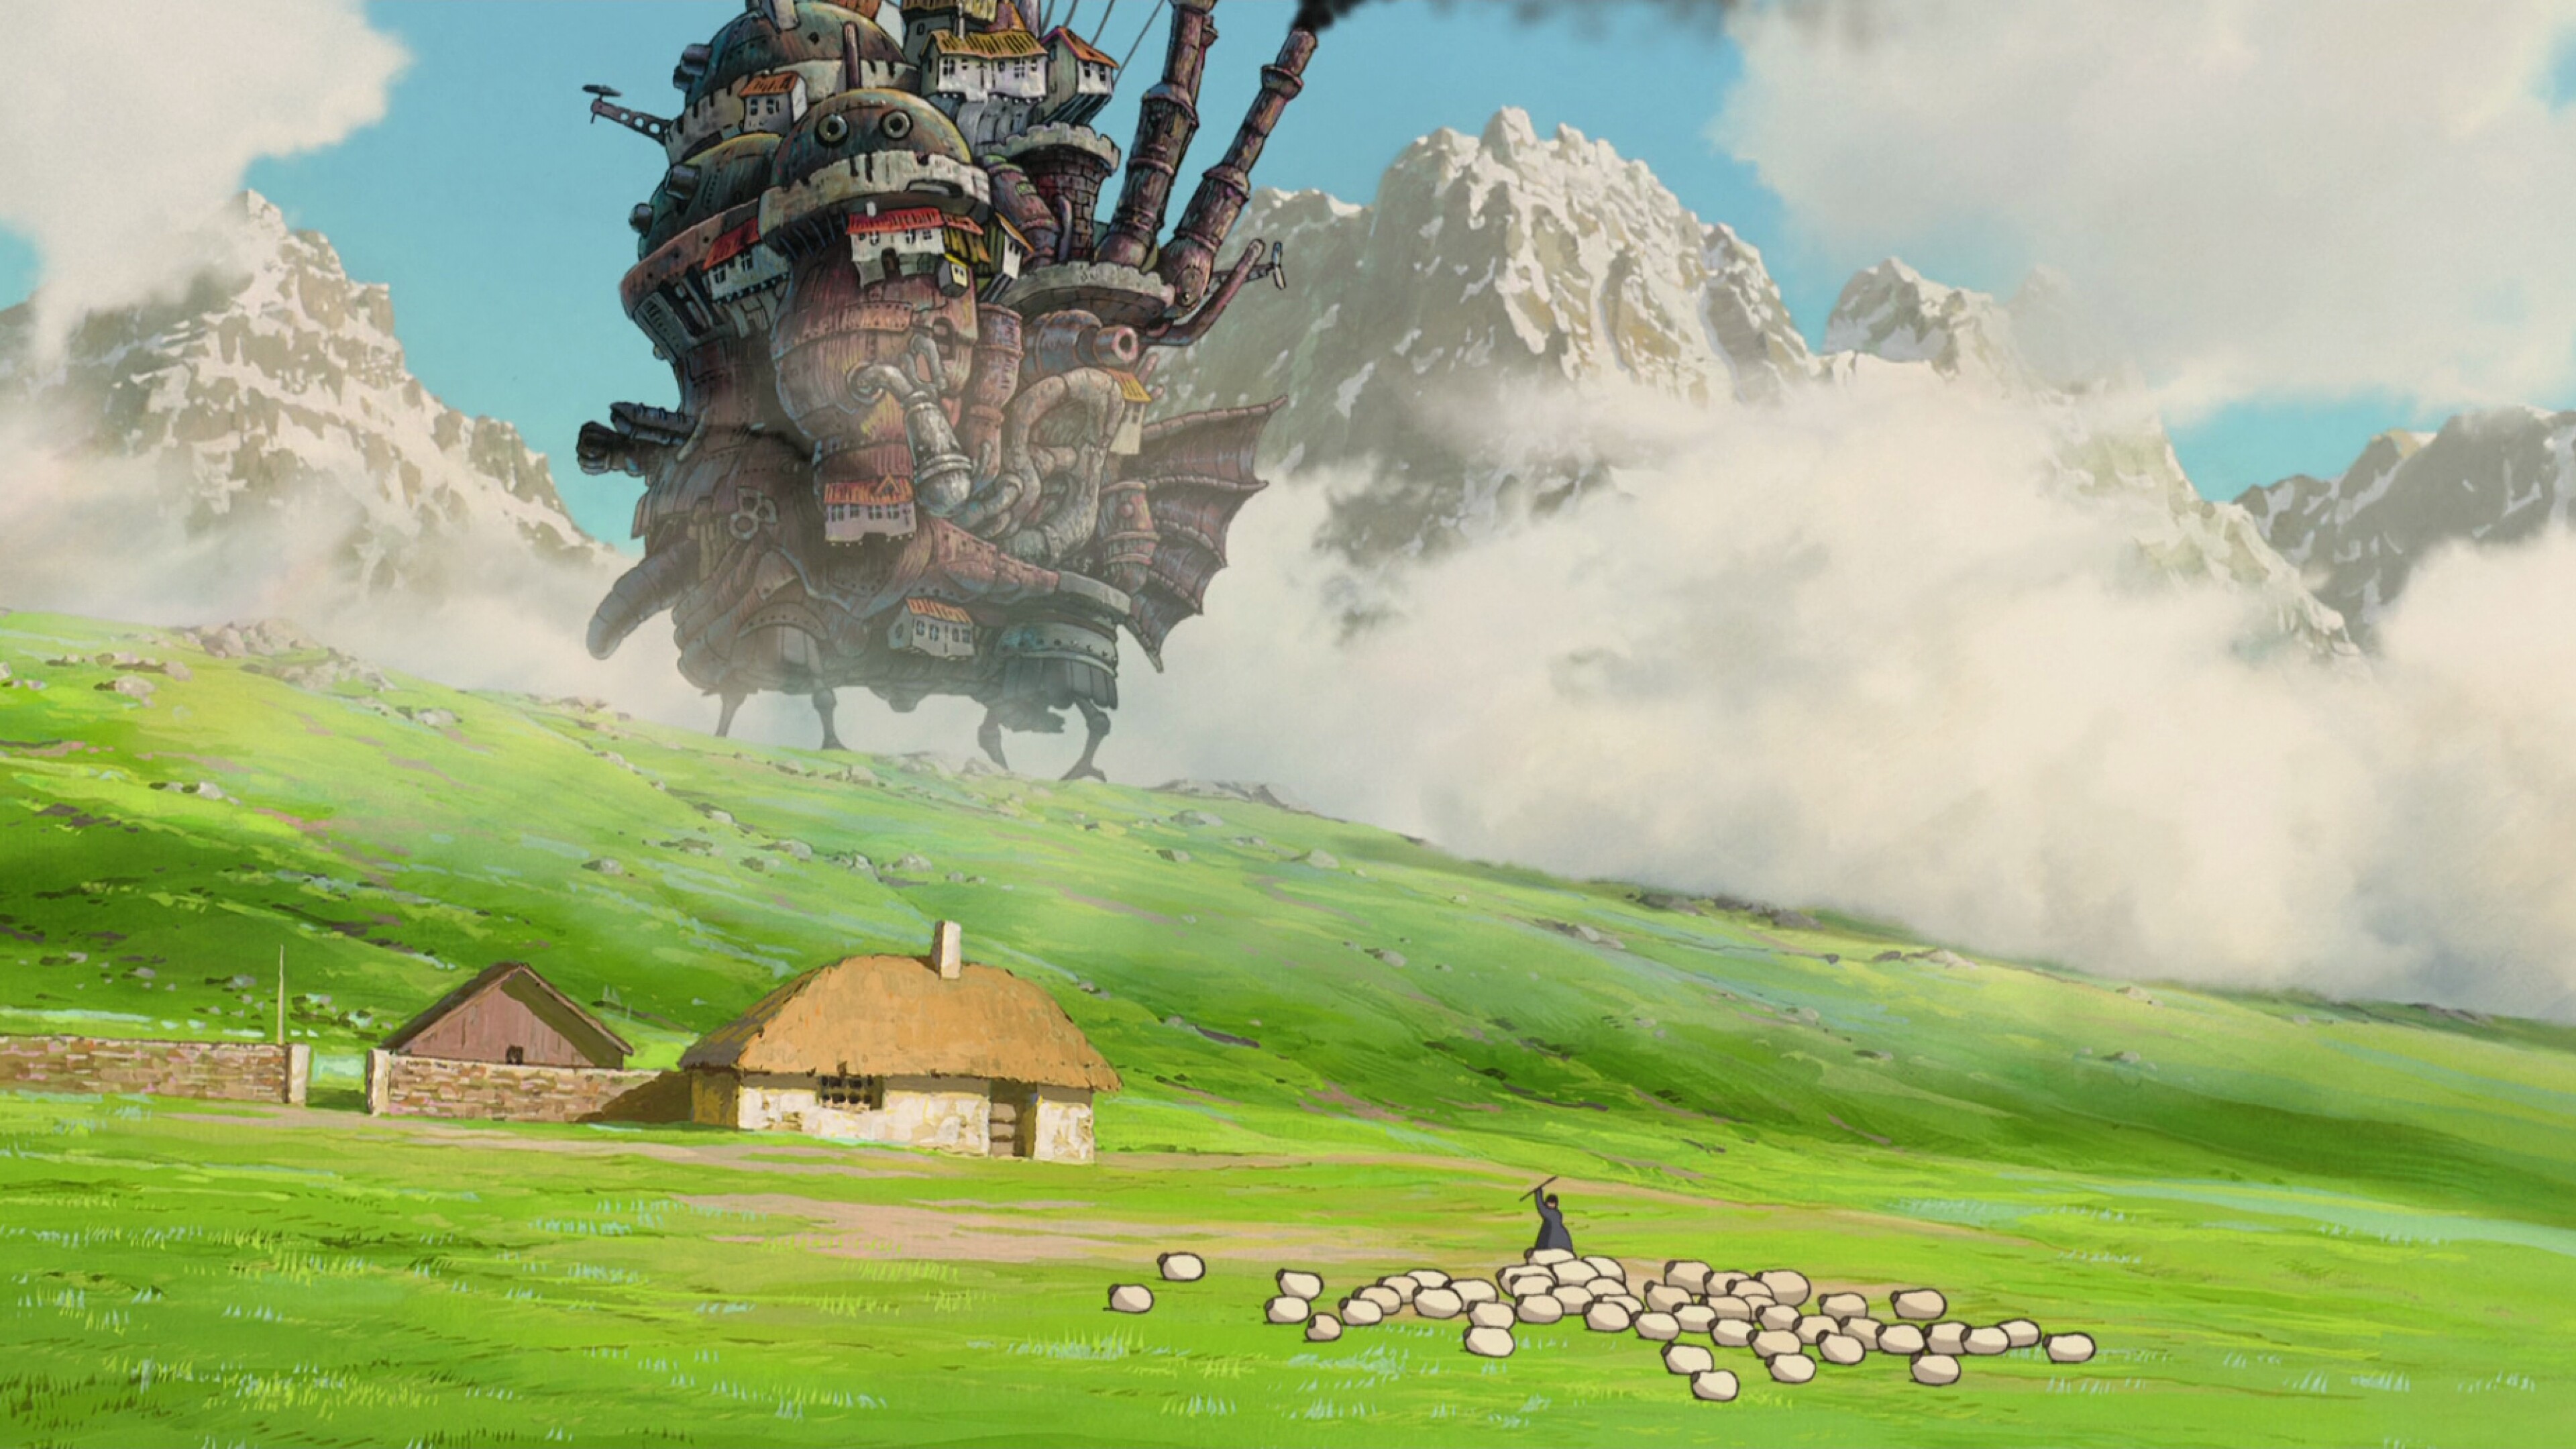 Studio Ghibli: Howl's Moving Castle, A fictional kingdom where both magic and early twentieth-century technology are prevalent. 3840x2160 4K Wallpaper.